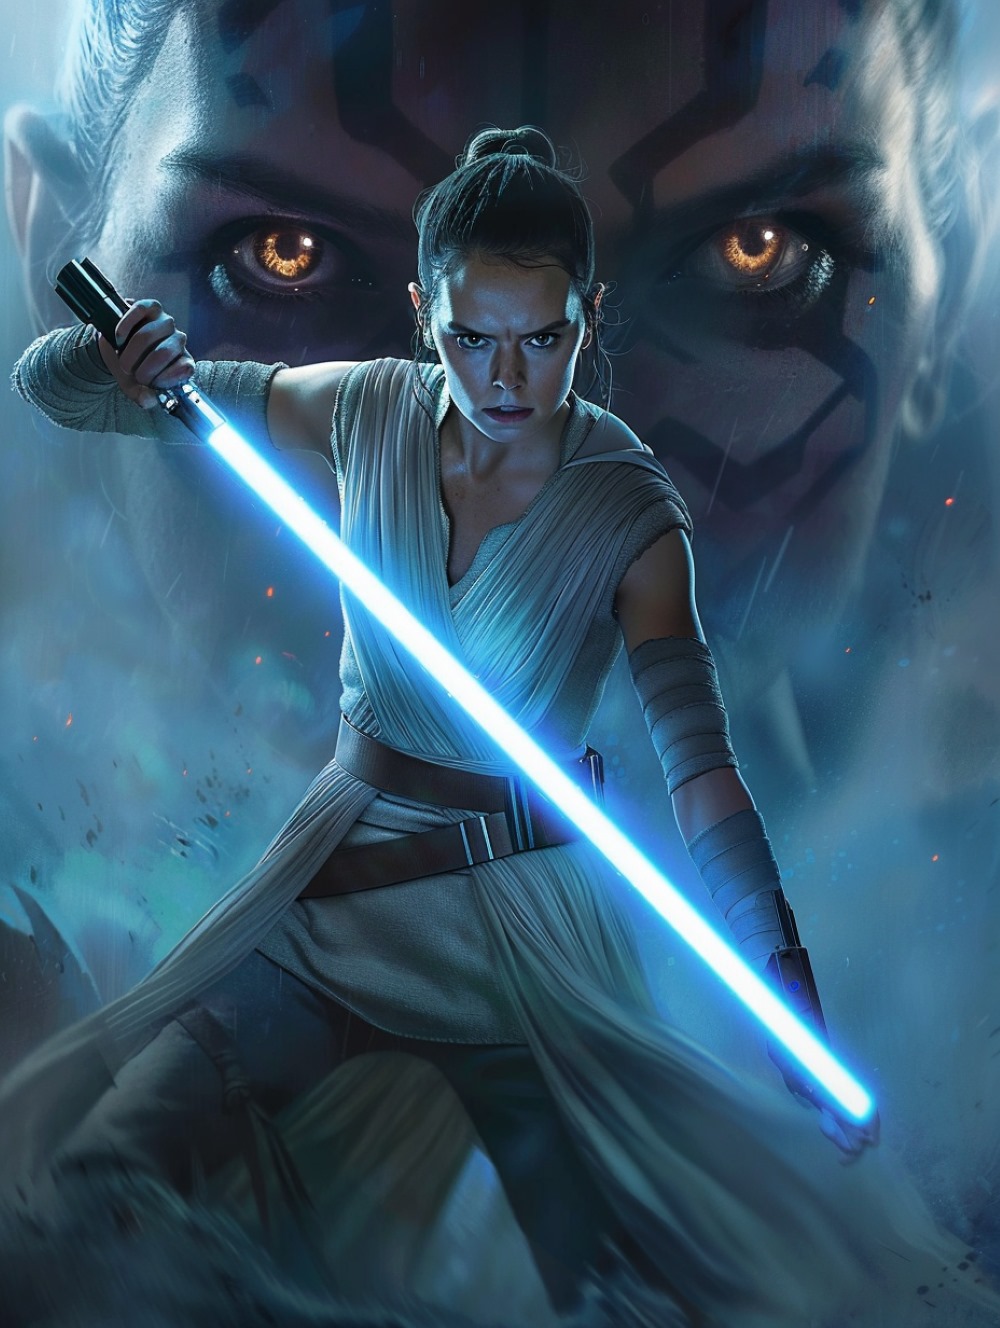 Rey and a mysterious evil figure behind